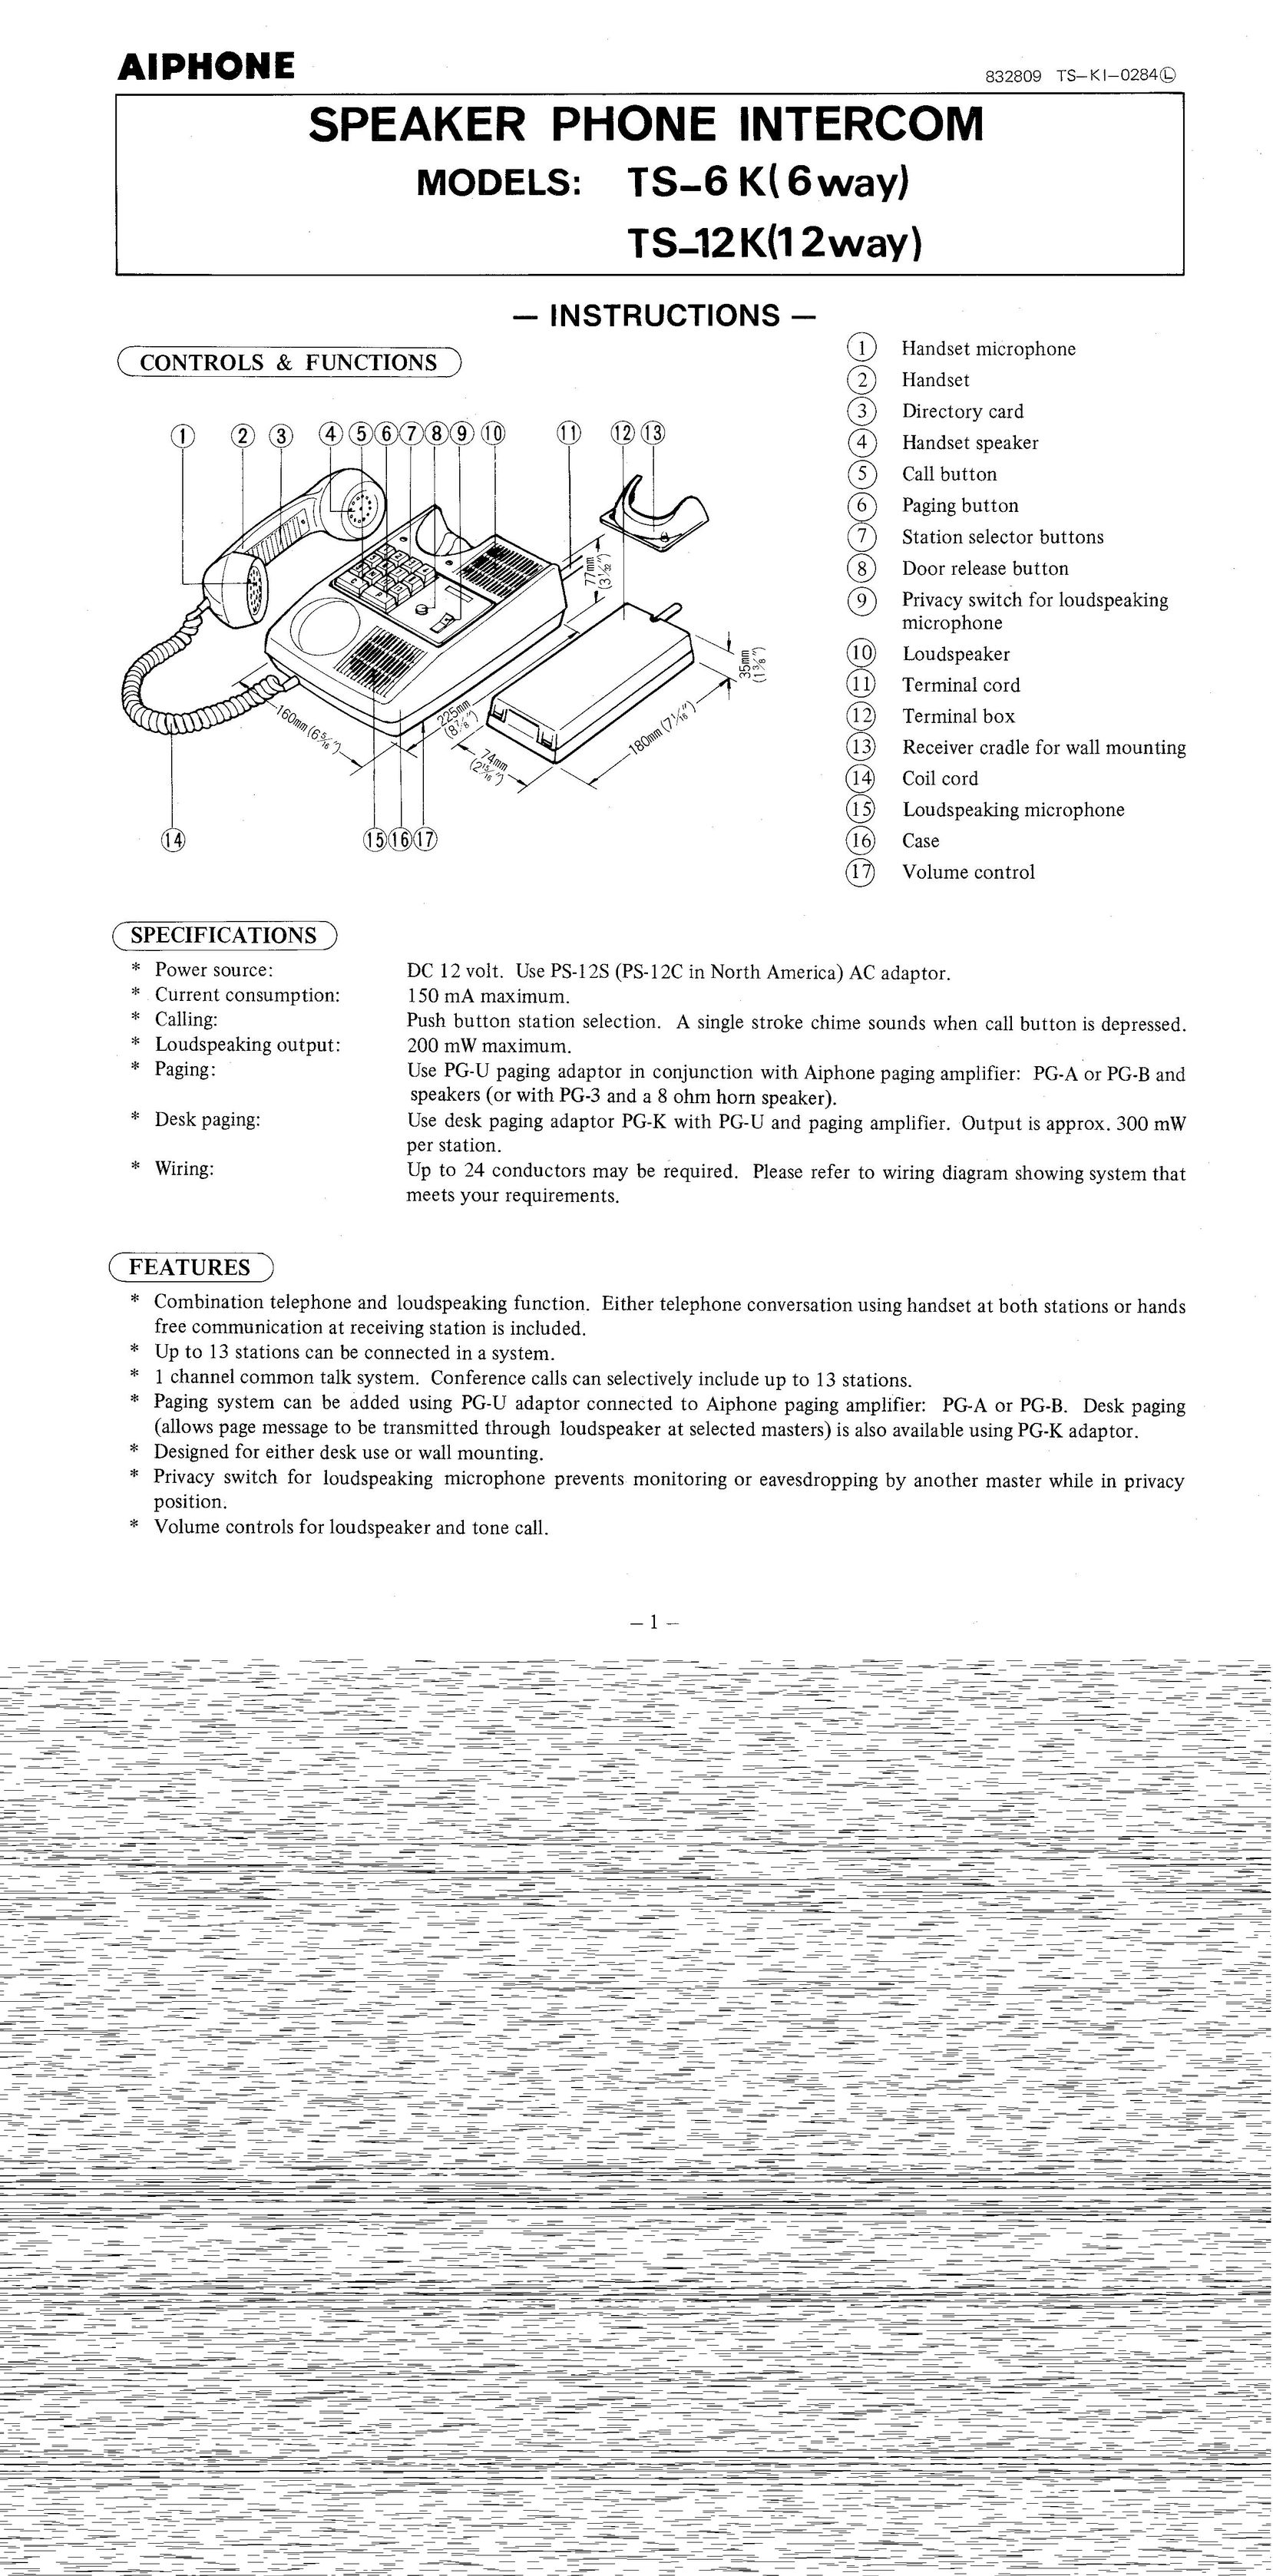 Aiphone TS-12K Conference Phone User Manual (Page 1)